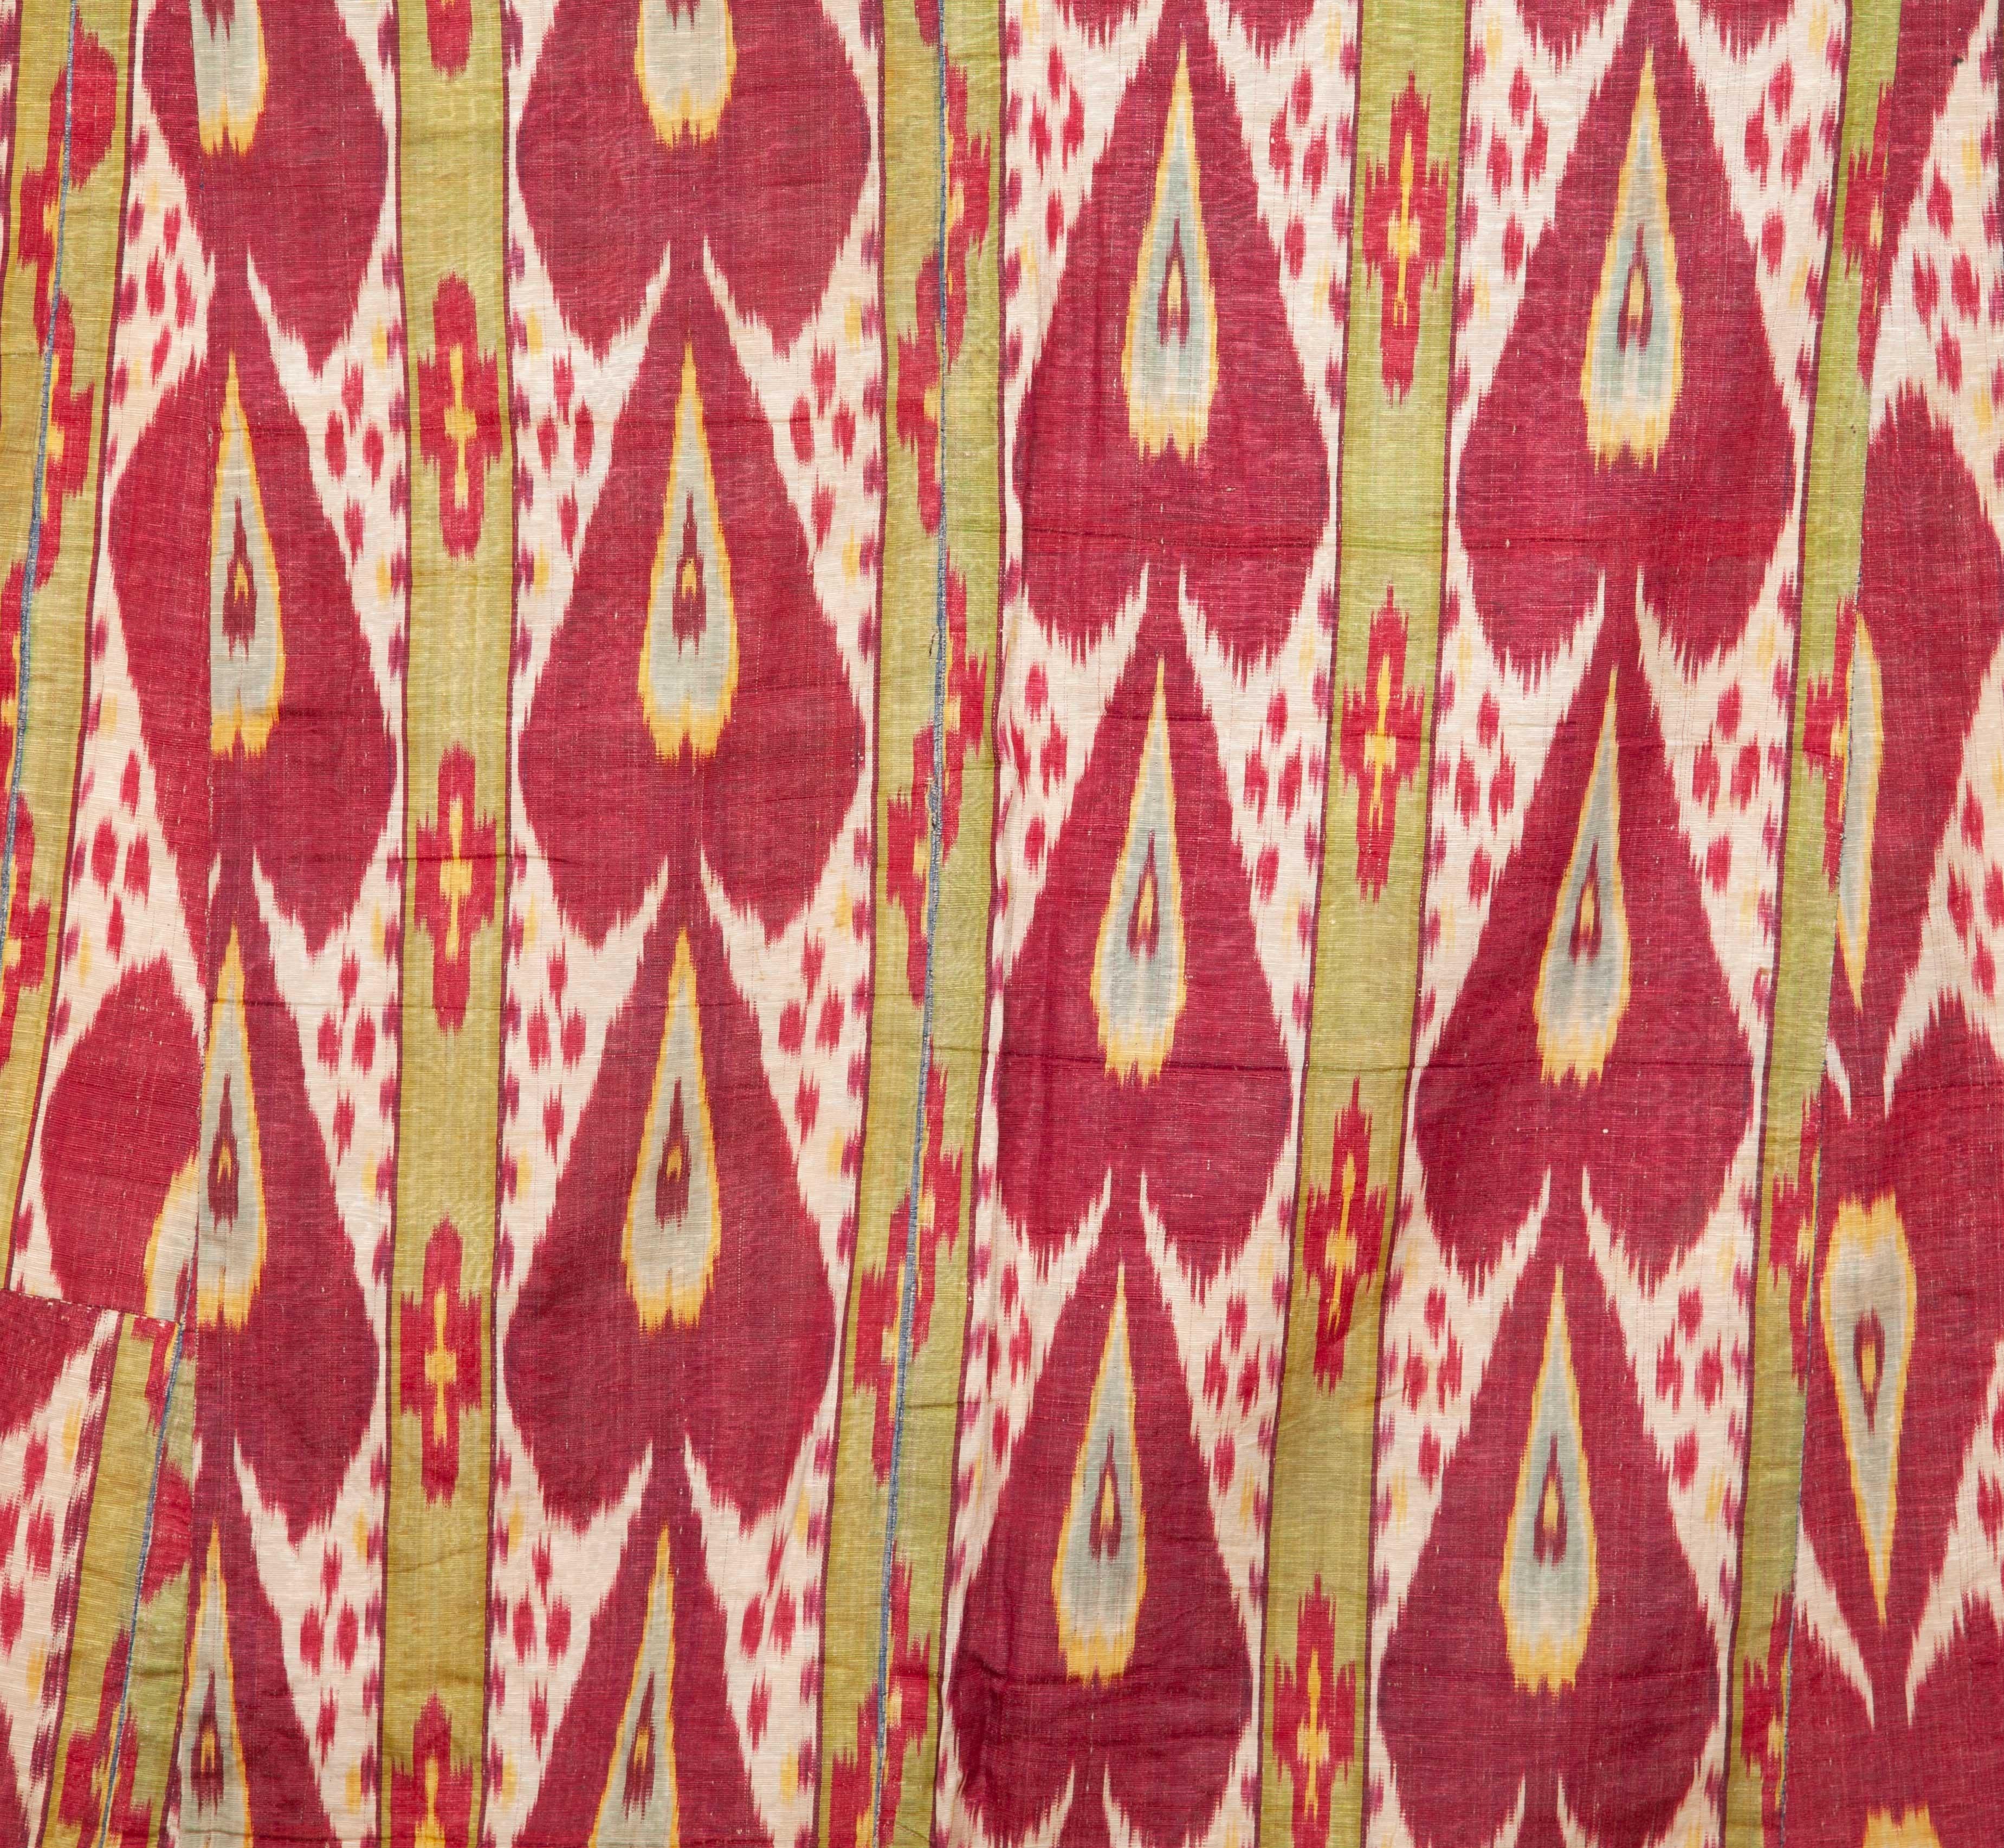 The lining of the piece might not be original but the quality of the ikat is great.